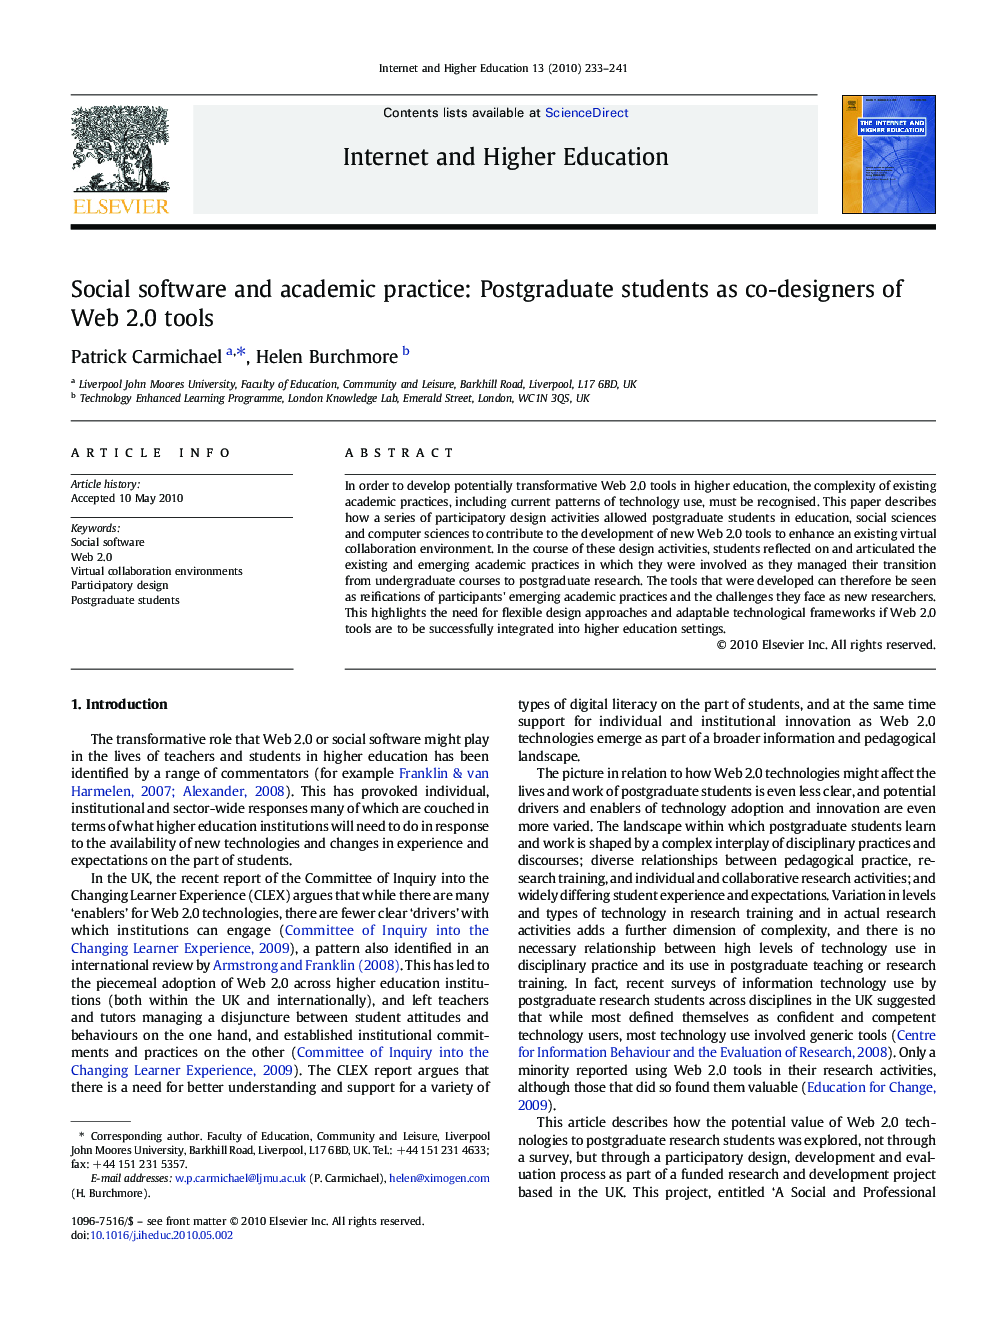 Social software and academic practice: Postgraduate students as co-designers of Web 2.0 tools